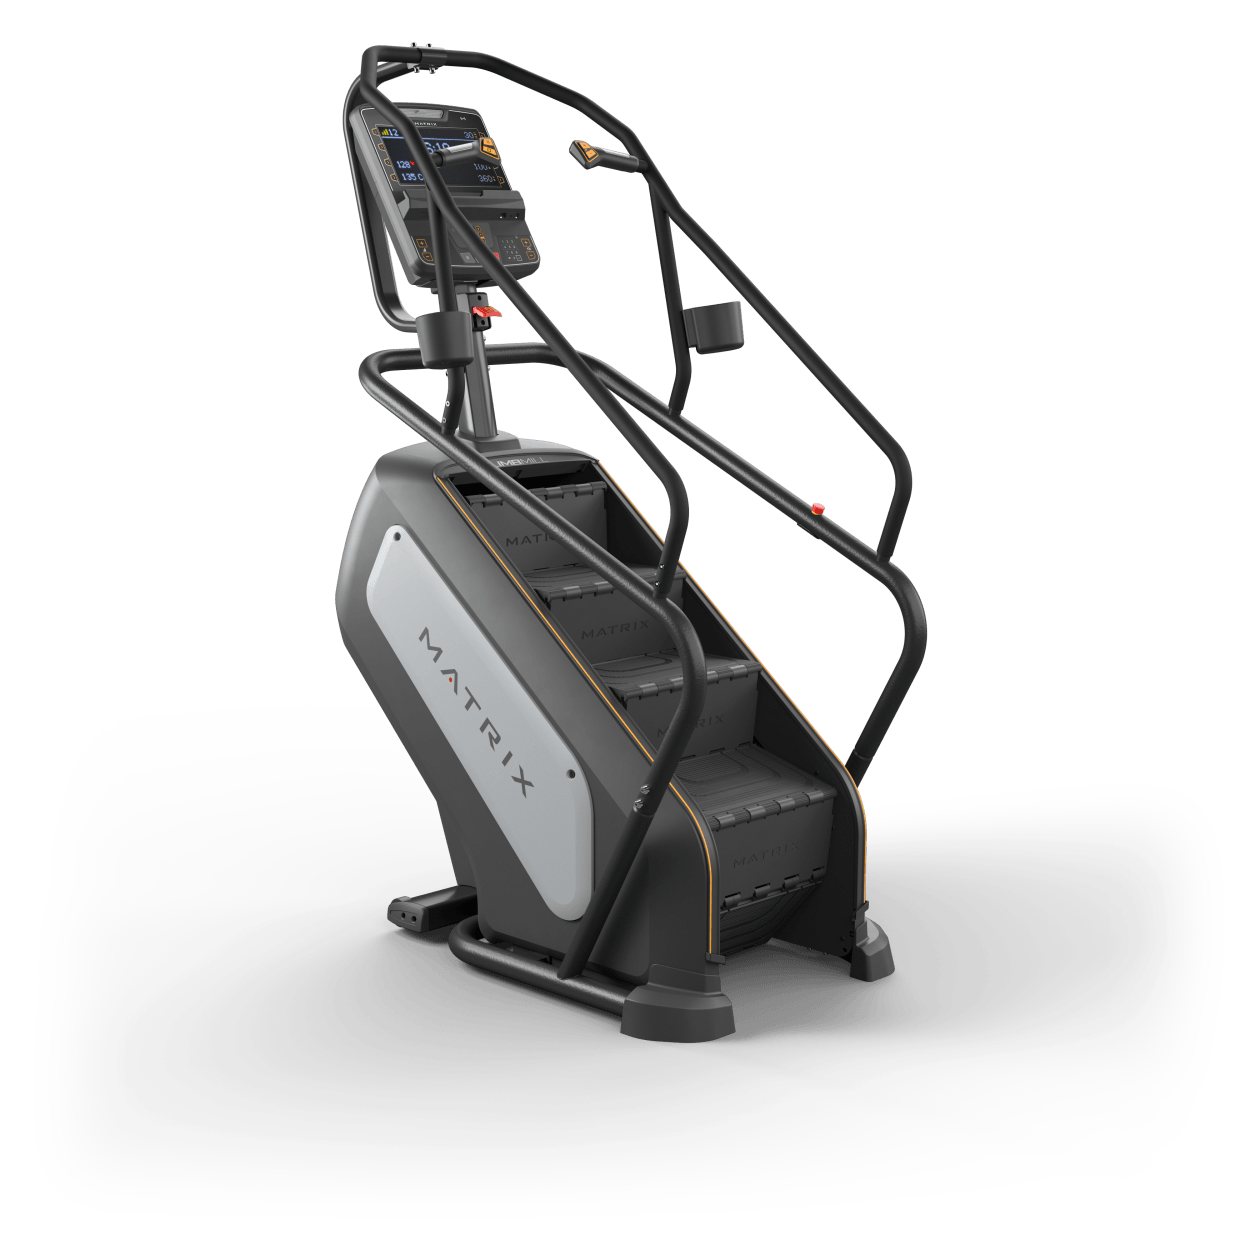 Matrix Fitness Edurance Climbmill with Premium LED Console full view | Fitness Experience